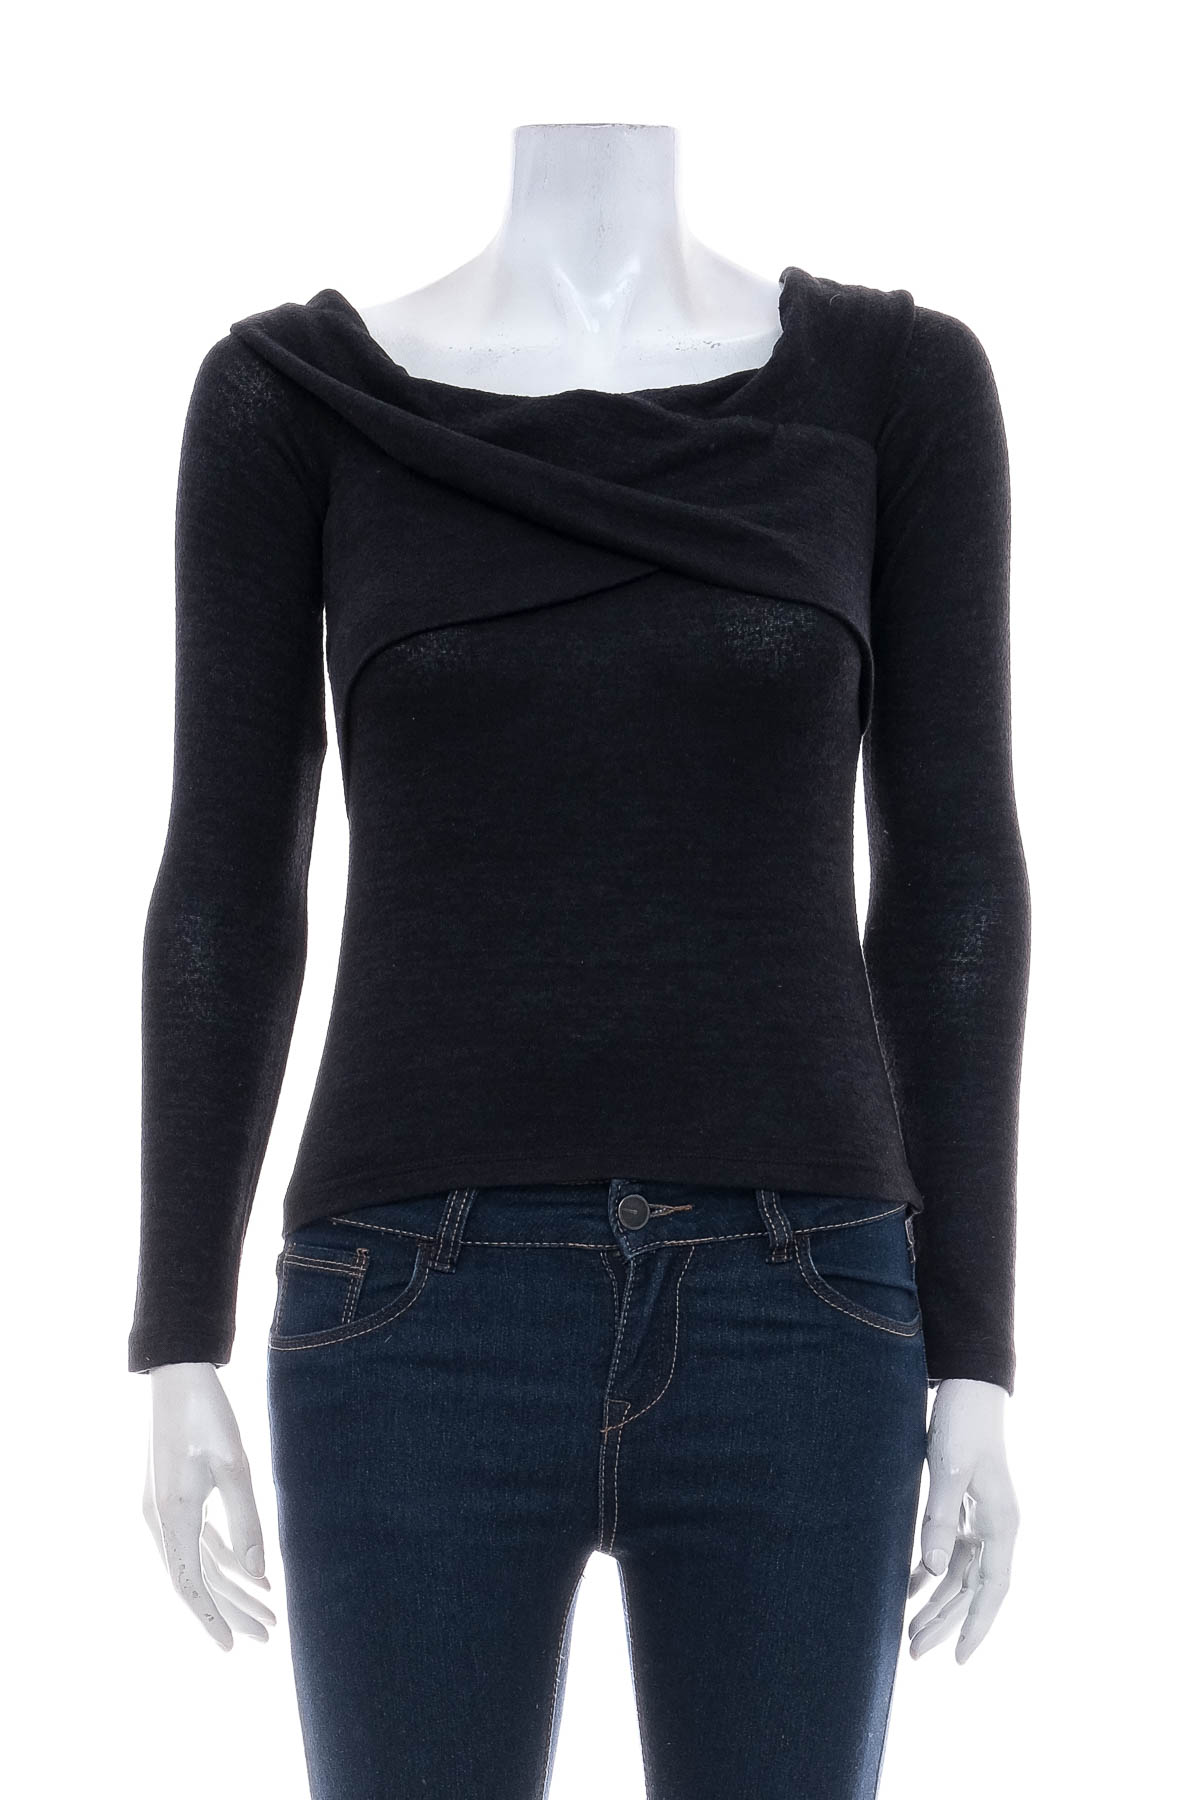 Women's sweater - Abercrombie & Fitch - 0